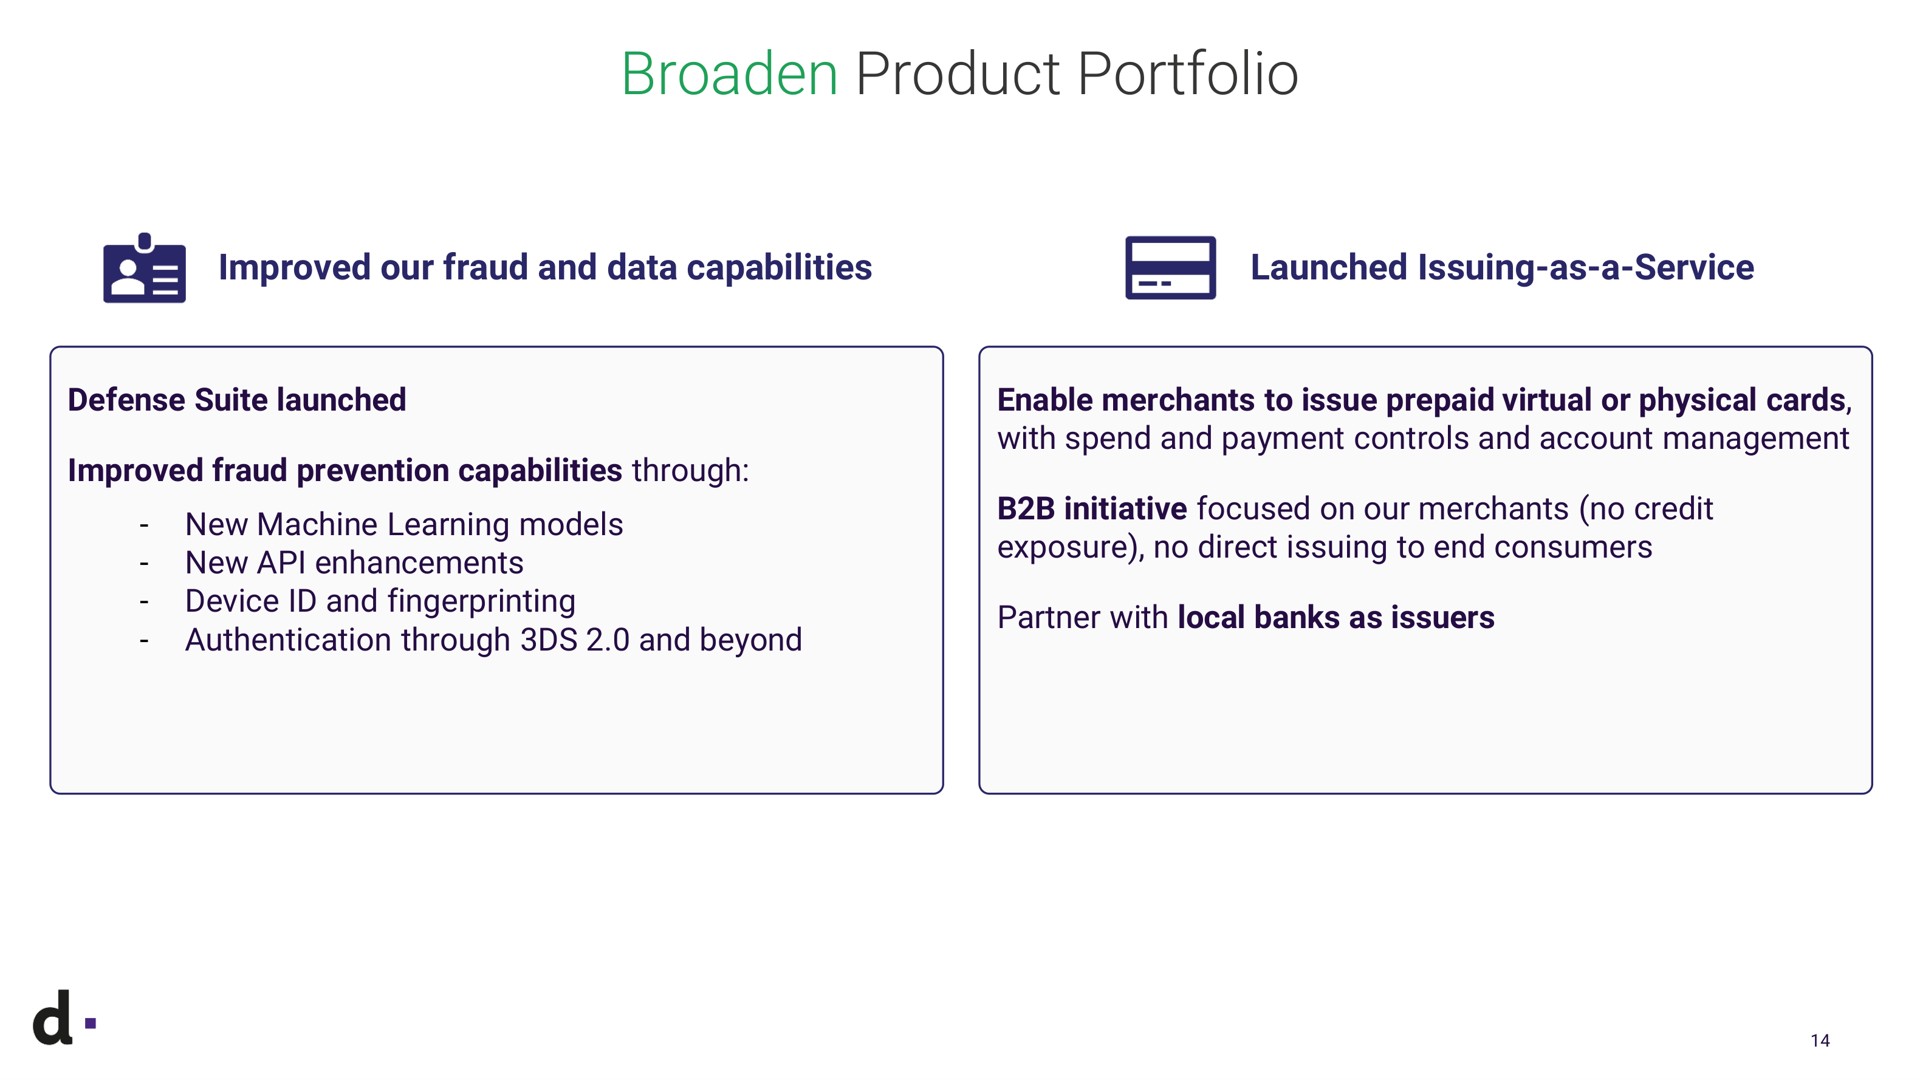 broaden product portfolio improved our fraud and data capabilities launched issuing as a service defense suite launched improved fraud prevention capabilities through new machine learning models new enhancements device and fingerprinting authentication through and beyond enable merchants to issue prepaid virtual or physical cards with spend and payment controls and account management initiative focused on our merchants no credit exposure no direct issuing to end consumers with i local bank local banks as issuers | dLocal